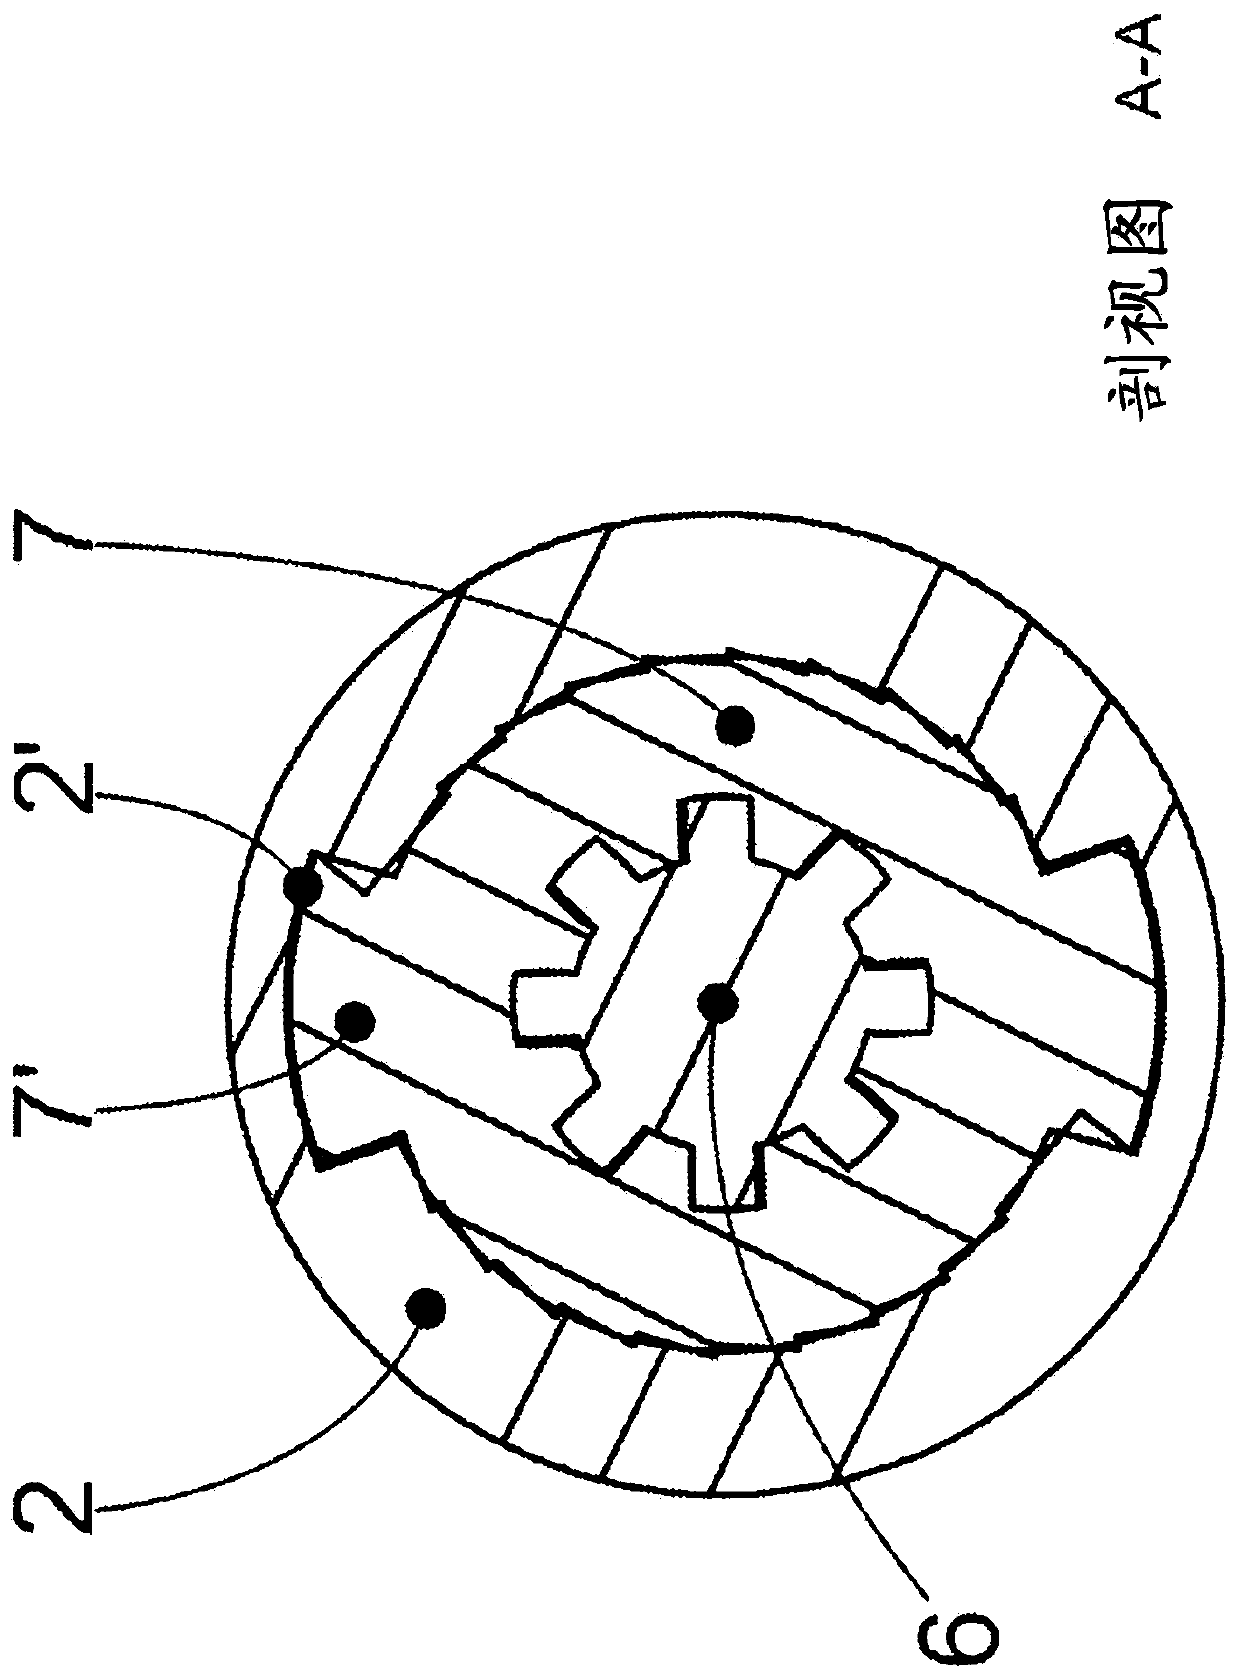 Drive device for a movable tappet